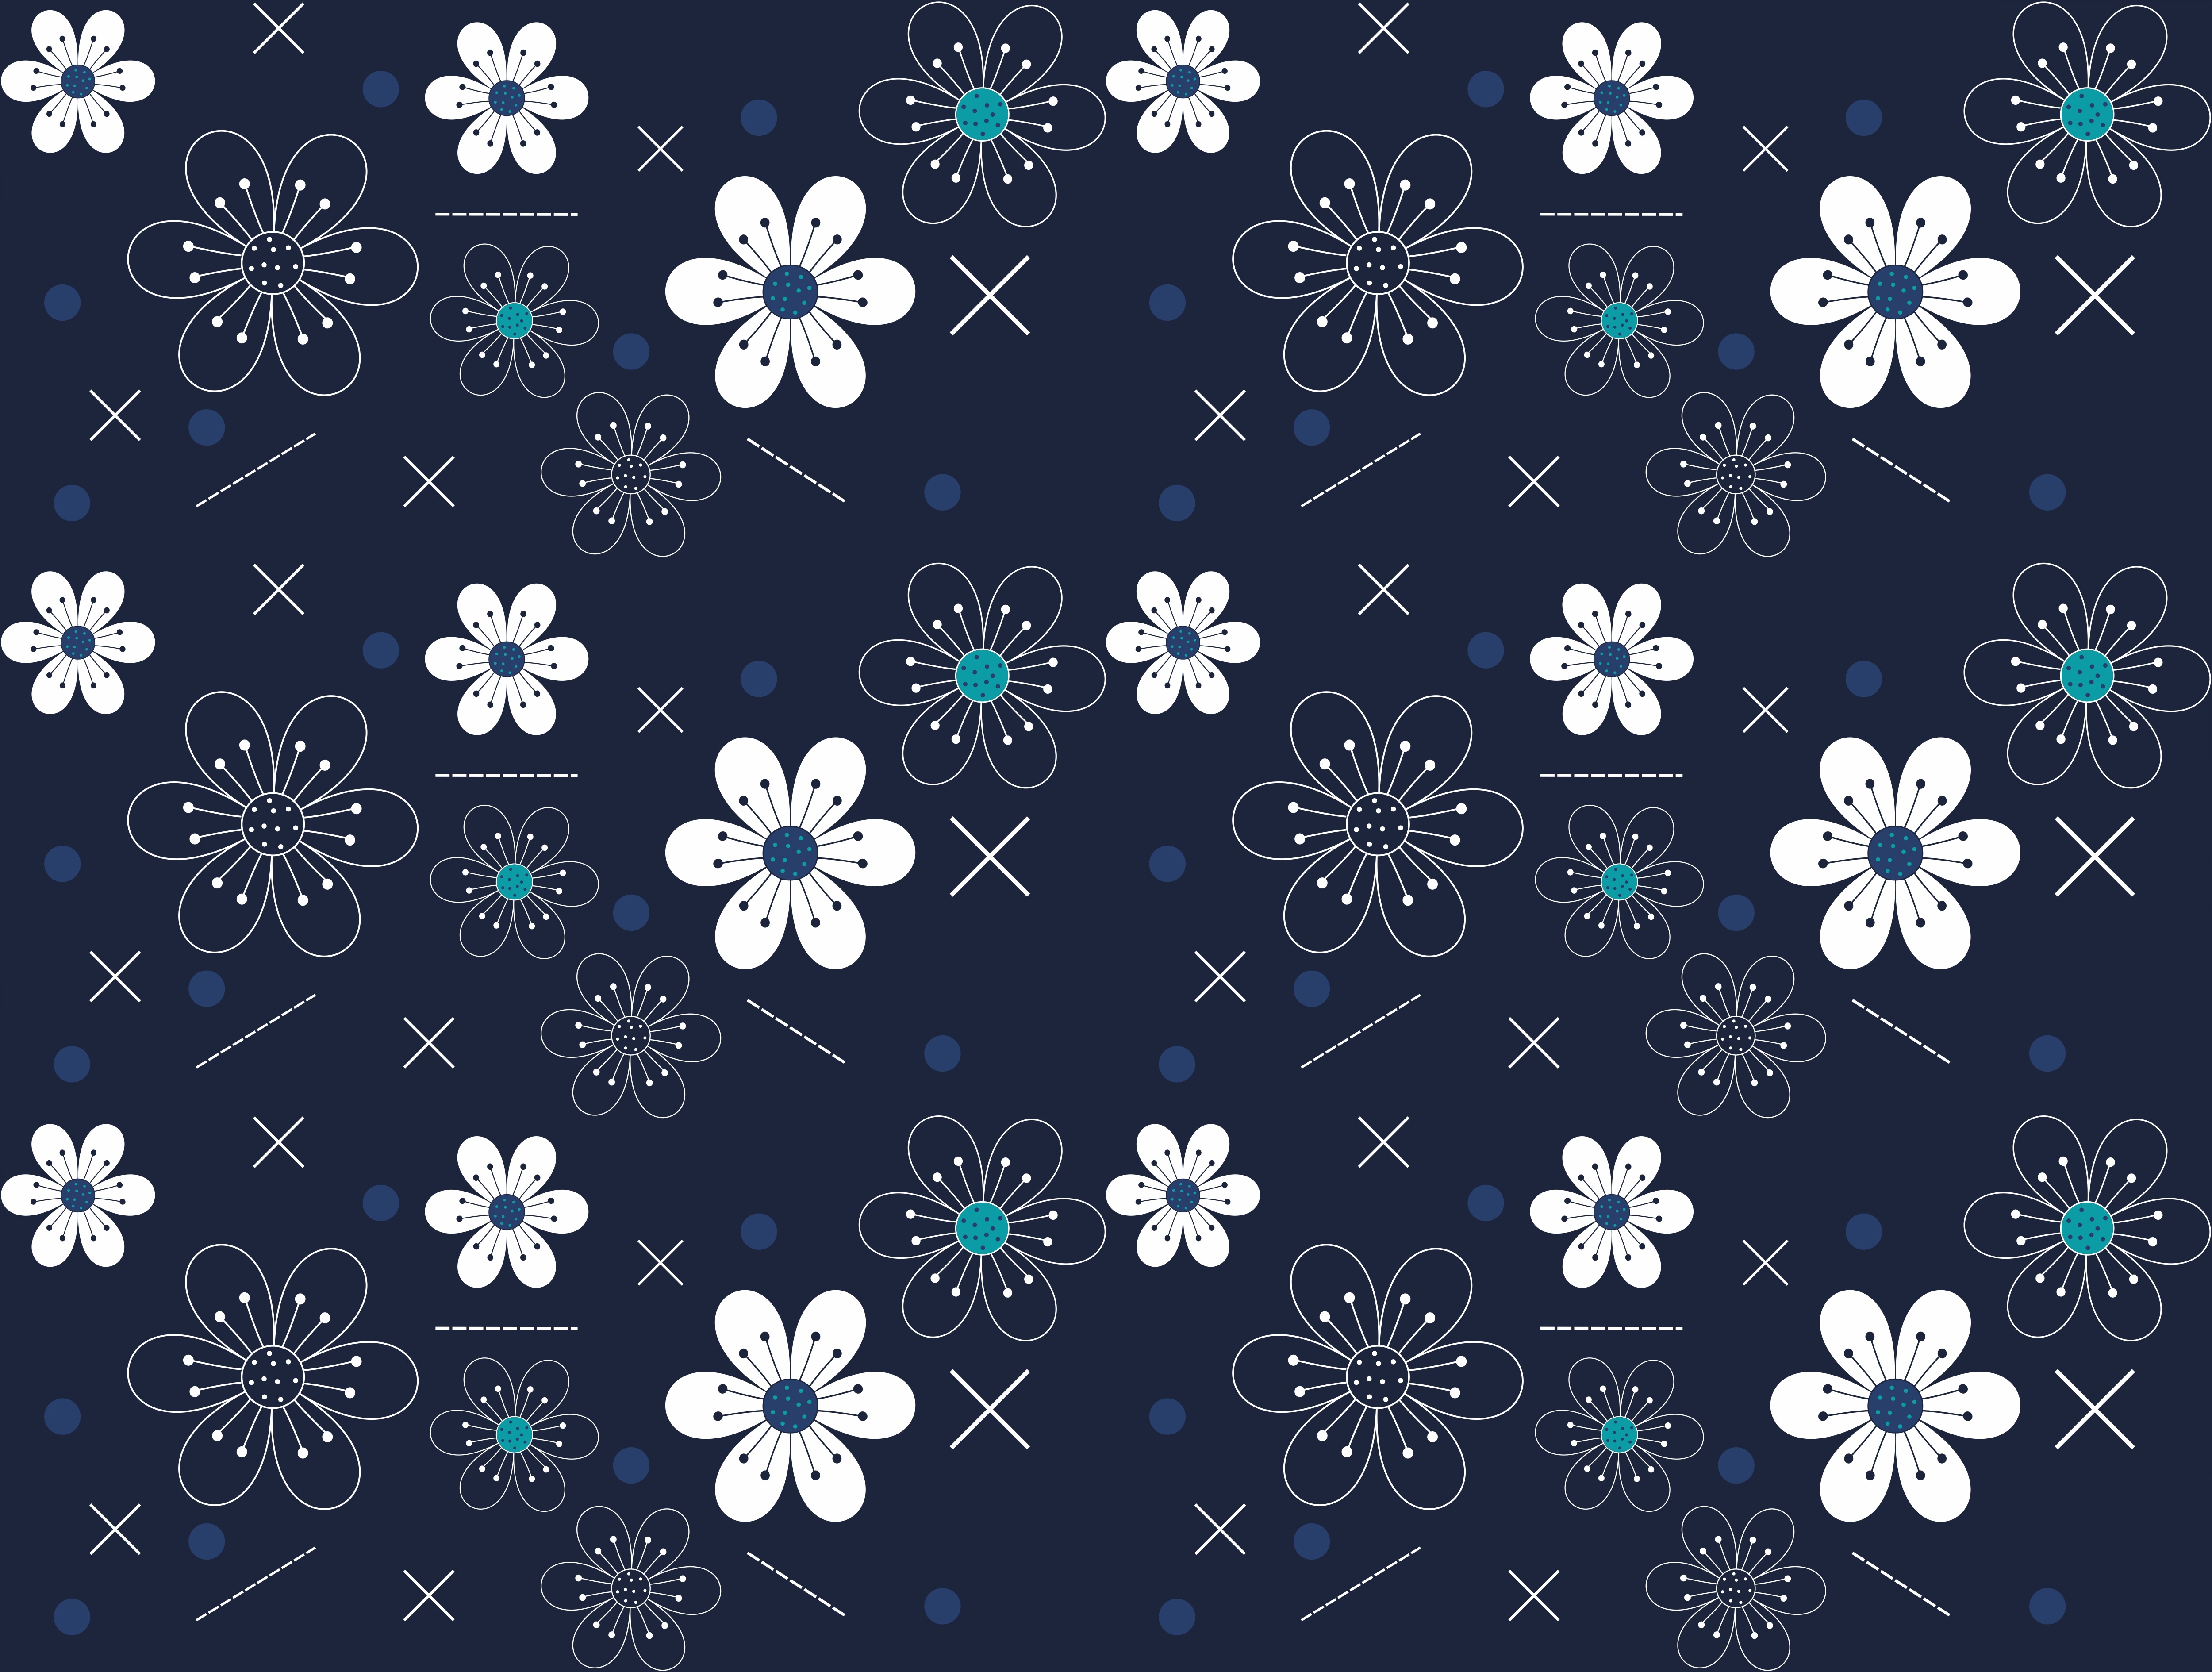 patterns, flowers, forms, vector, form cell phone wallpapers